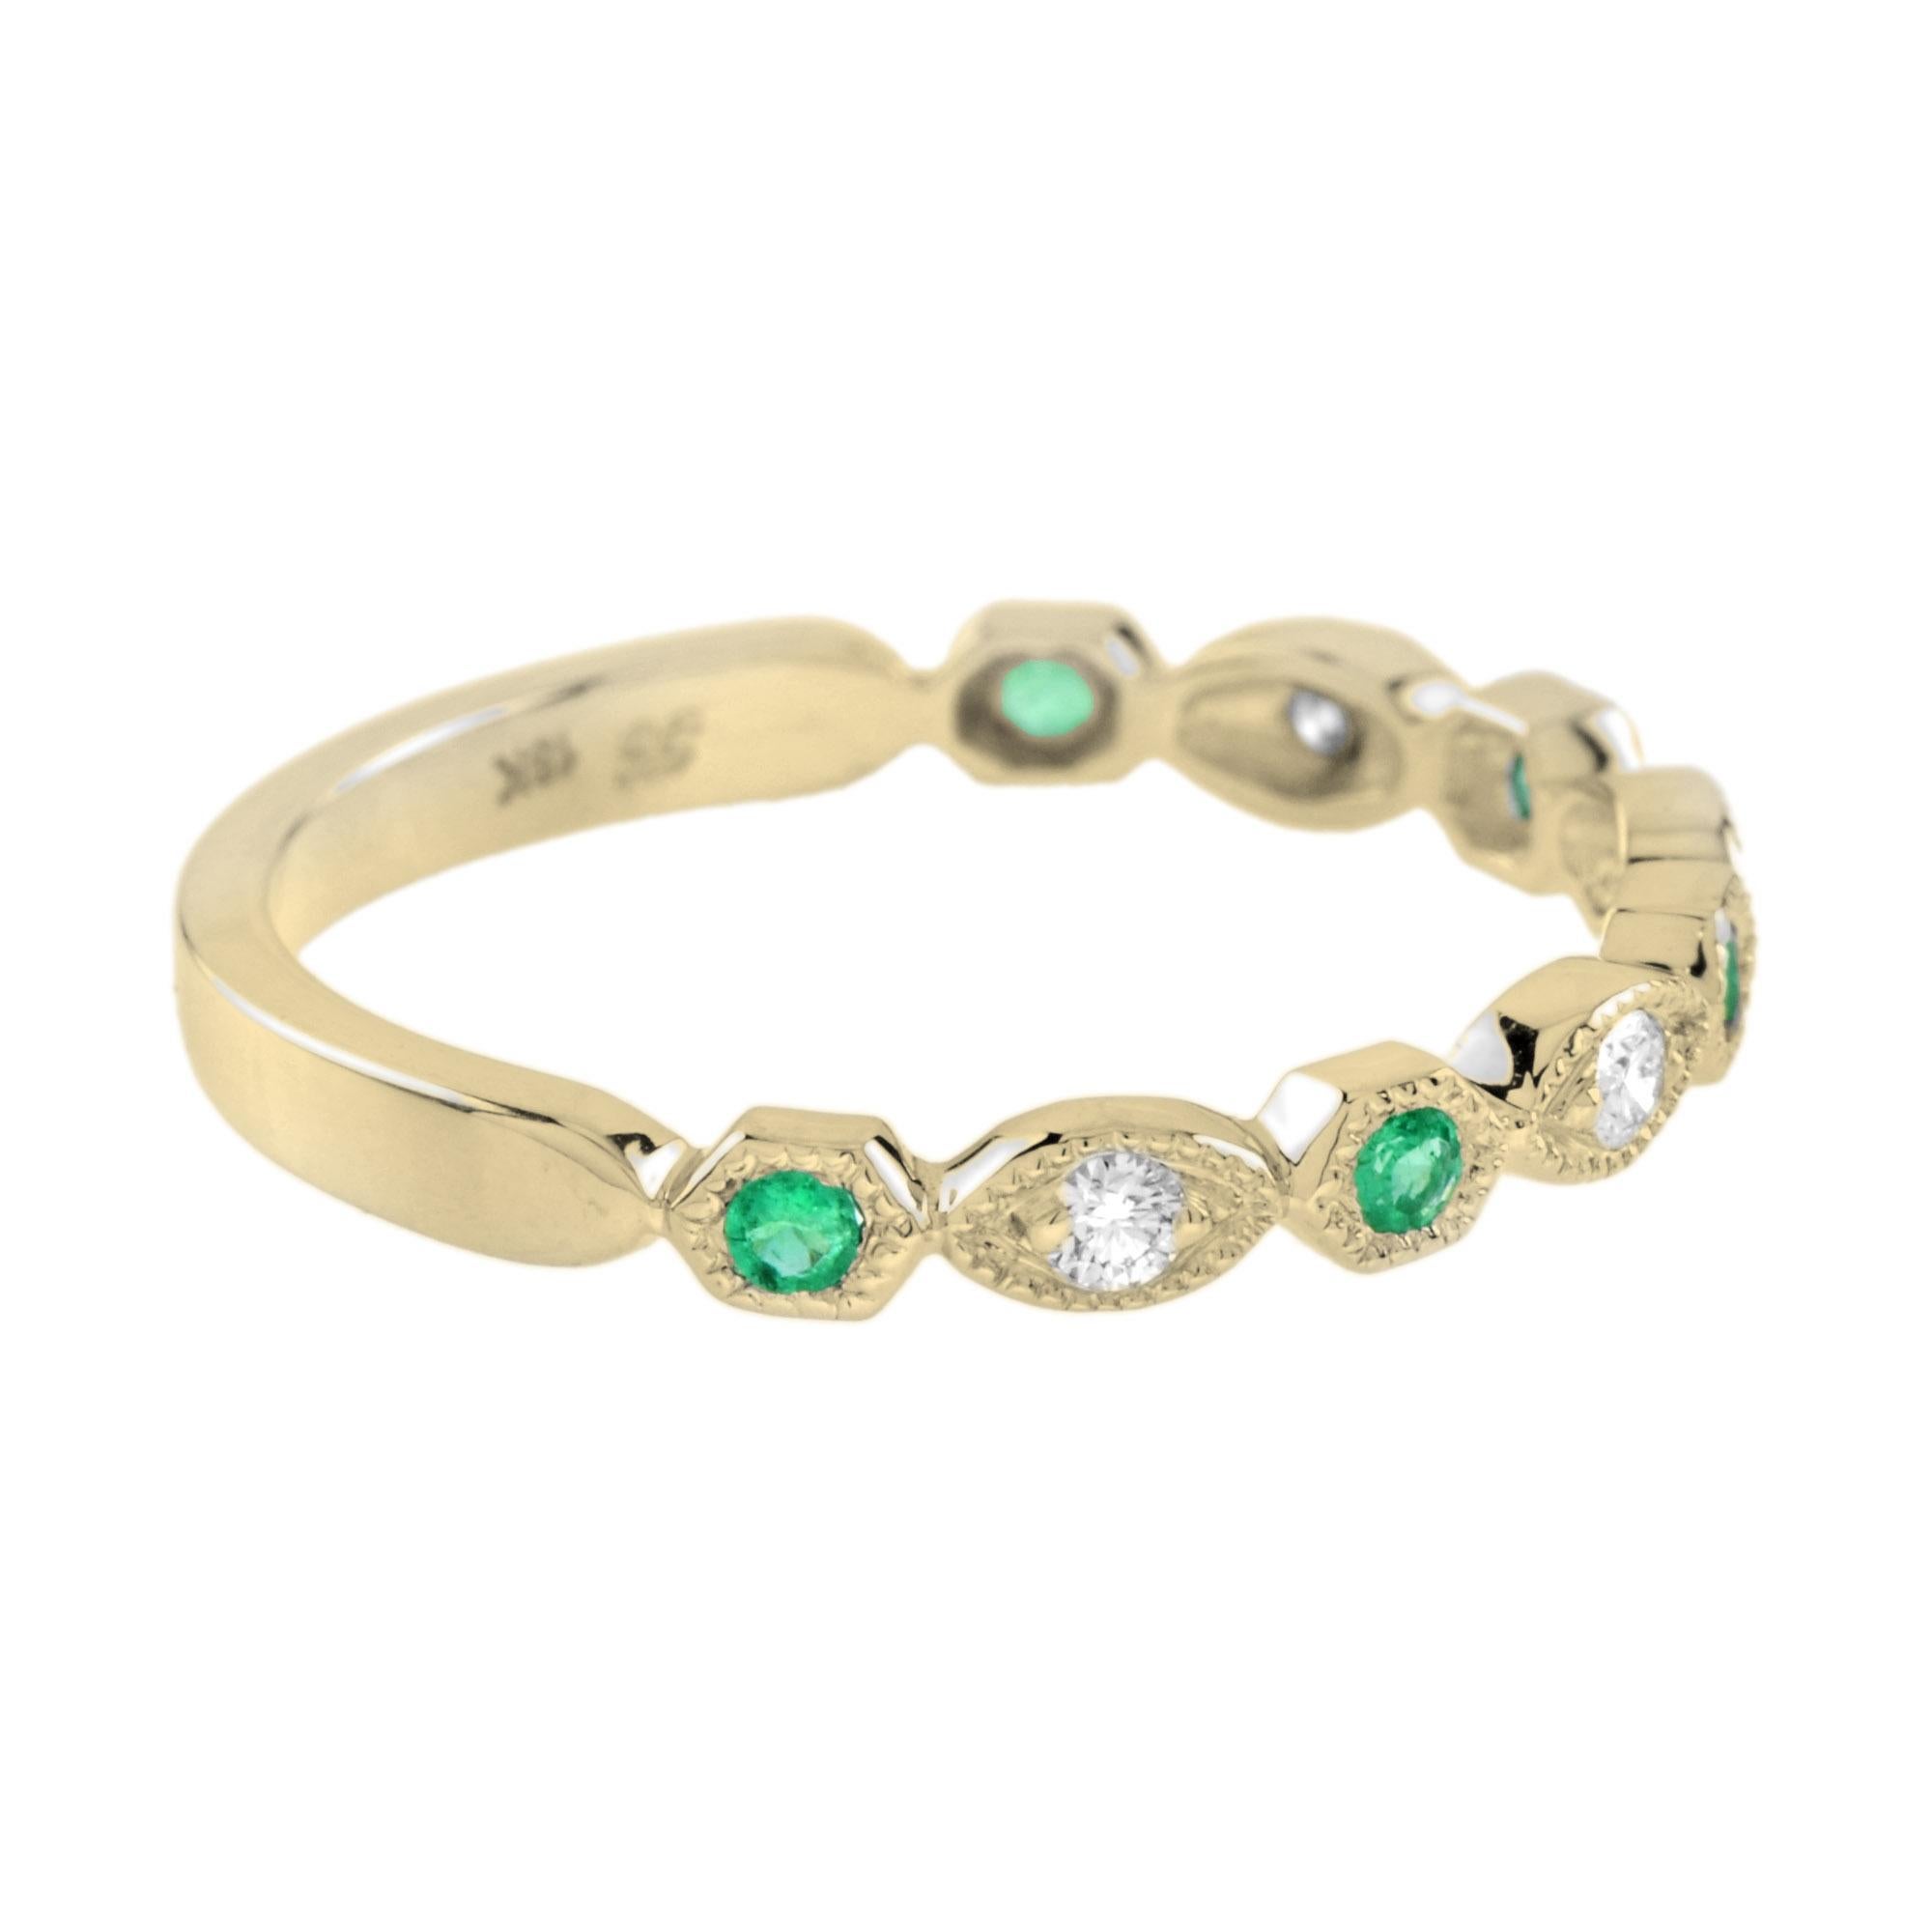 For Sale:  Emerald and Diamond Vintage Style Half Eternity Band Ring in 14K Yellow Gold 3